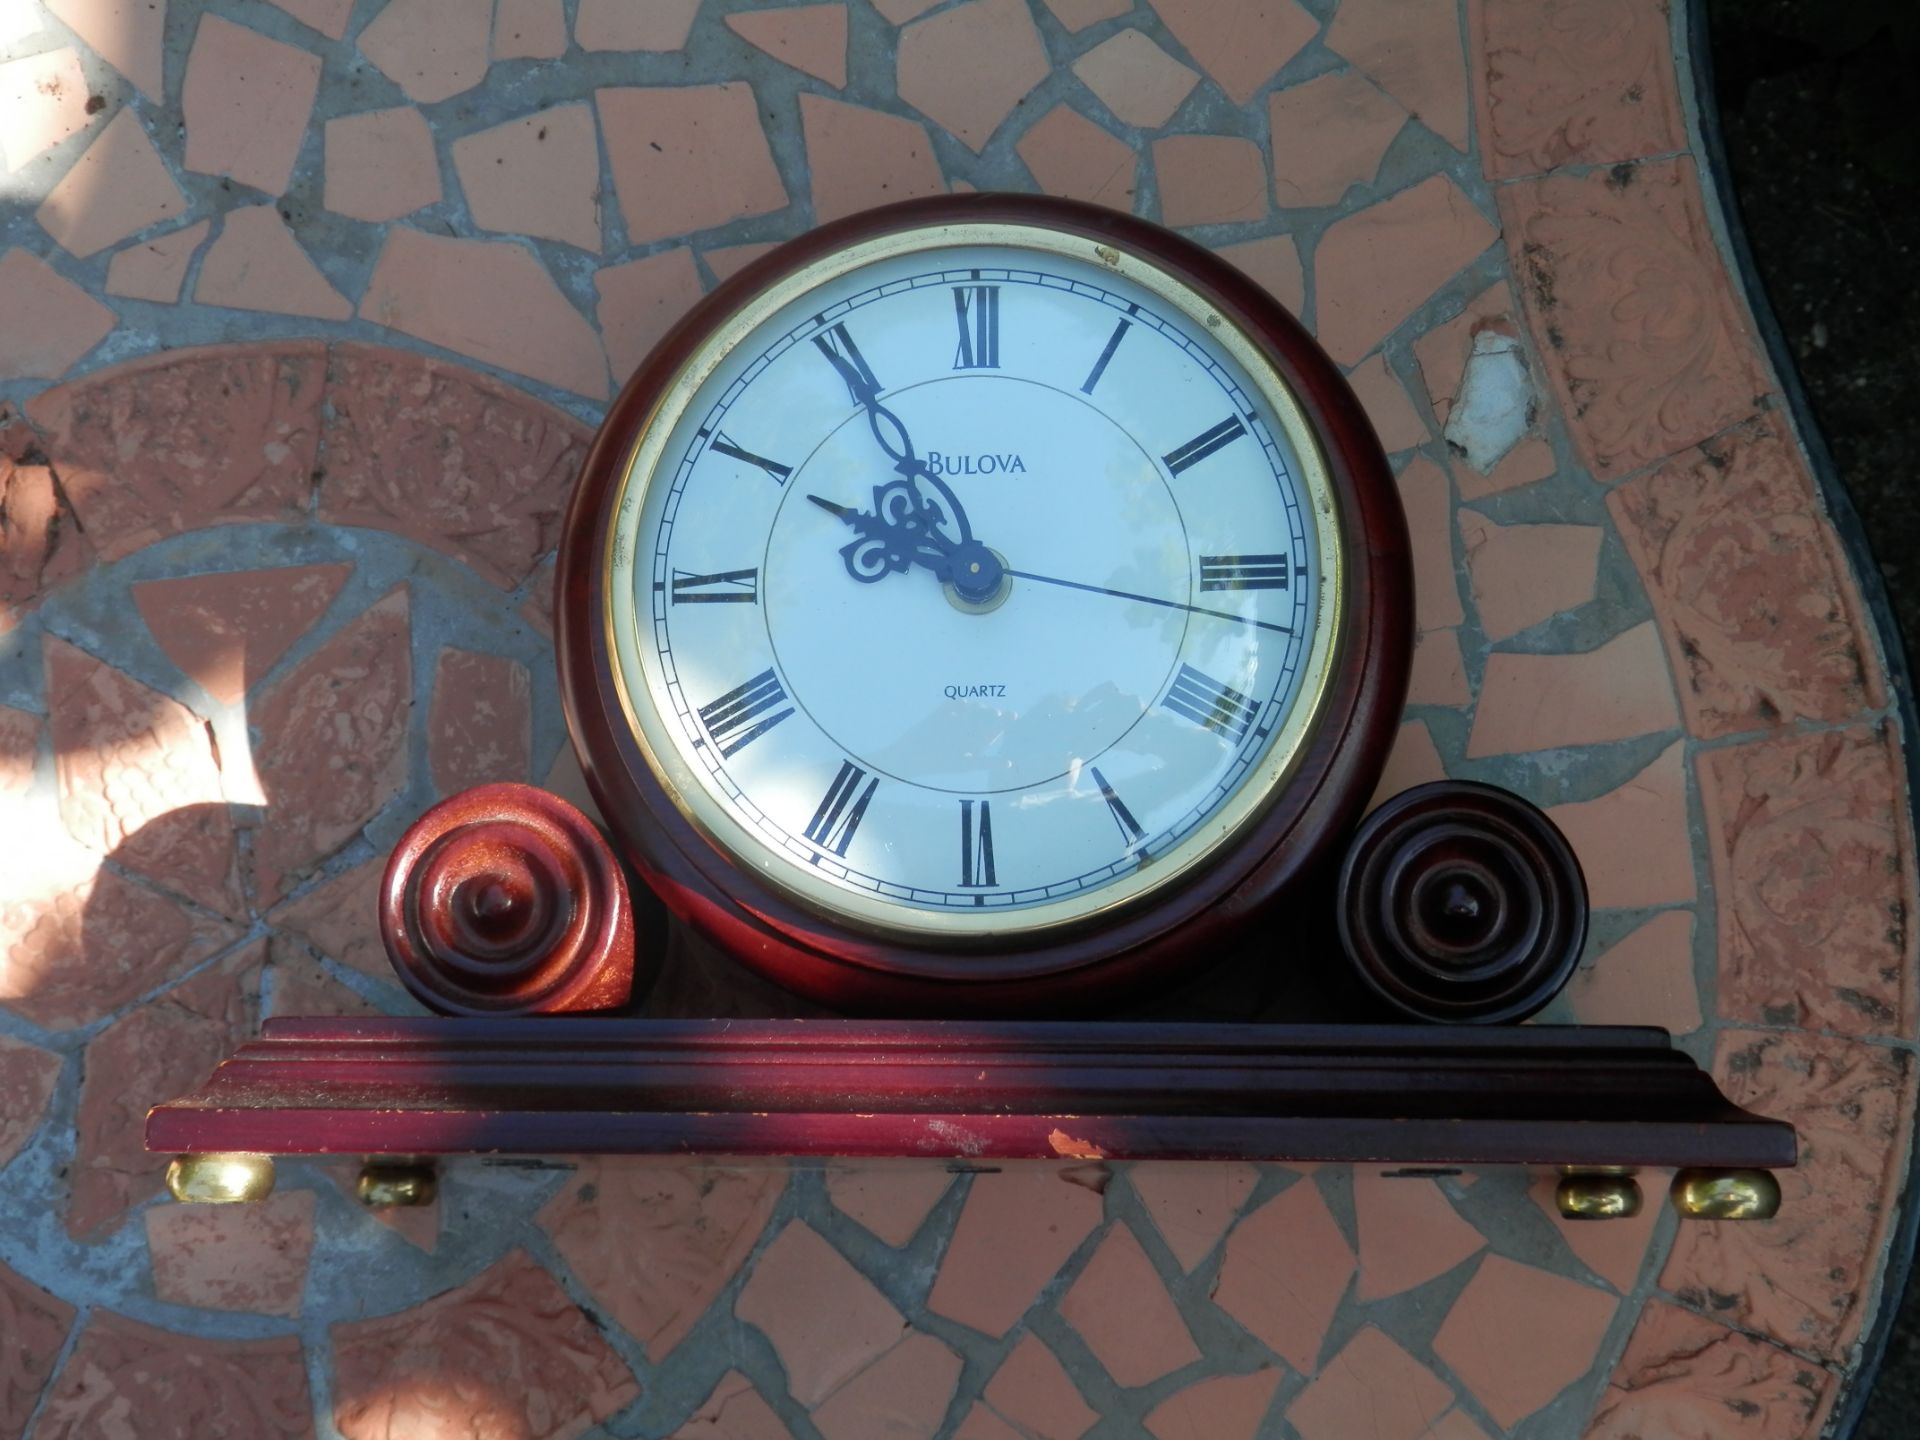 11" WIDE 8" TALL BULOVA QUARTZ WOODEN MANTLE CLOCK. WORKING WELL & KEEPING TIME. - Image 2 of 7